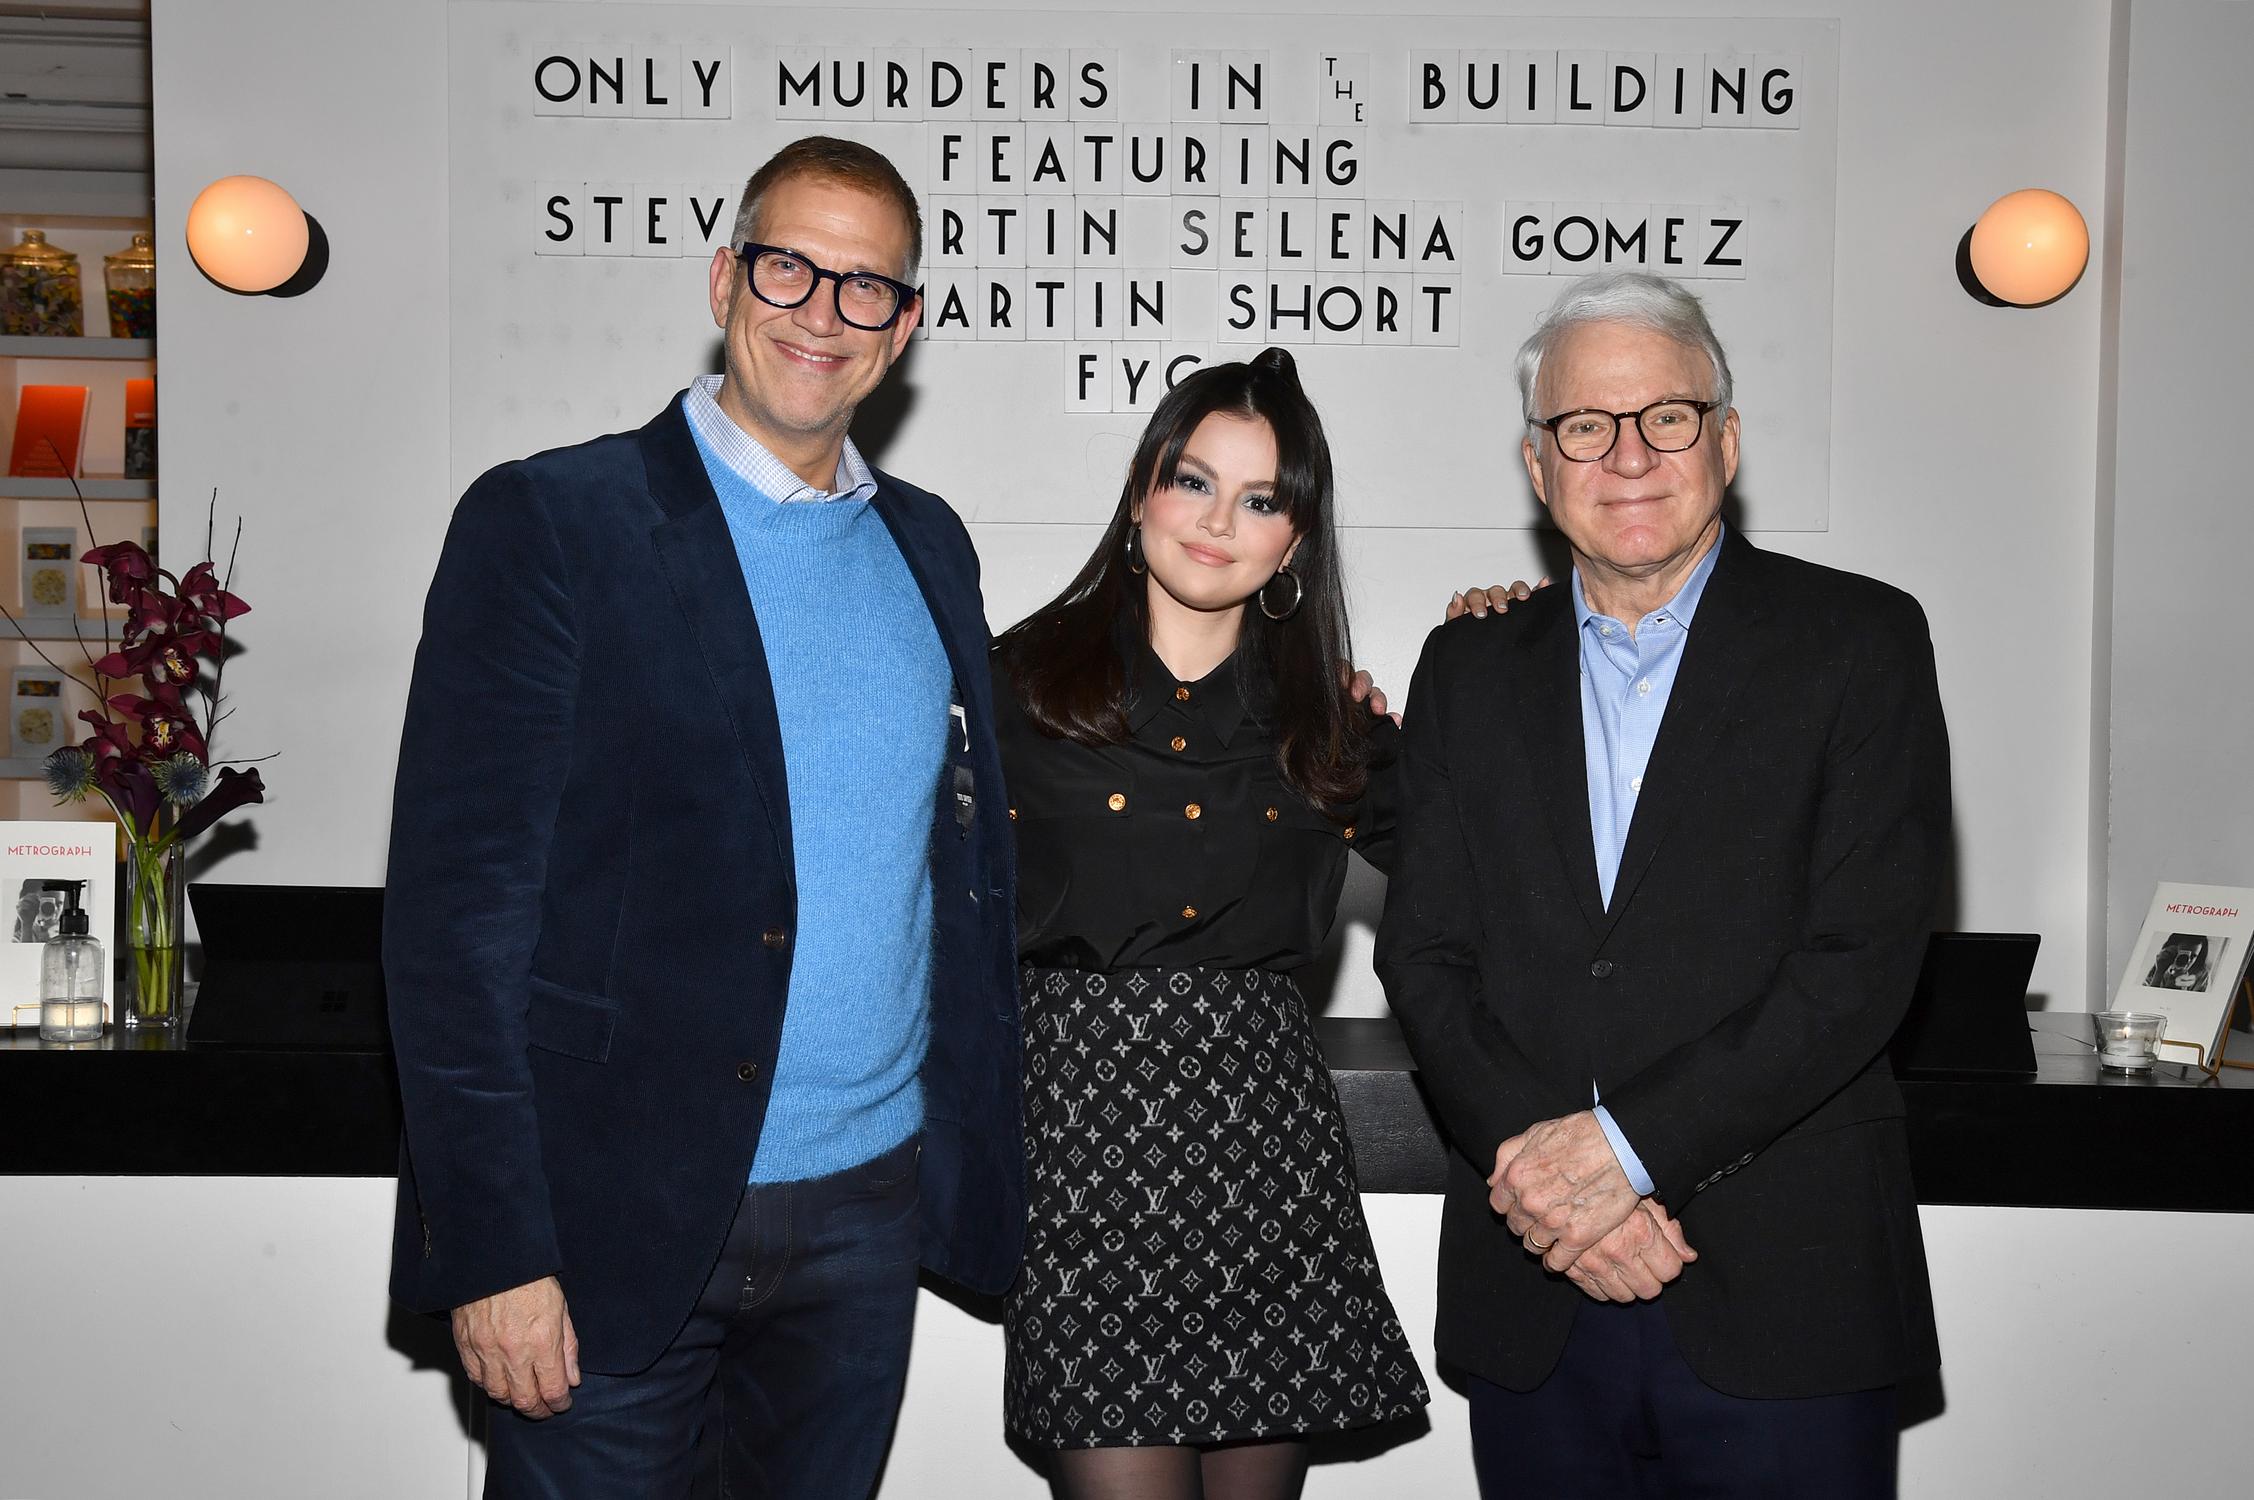 Selena Gomez at ‘Only Murders in the Building’ FYC Event on December 13